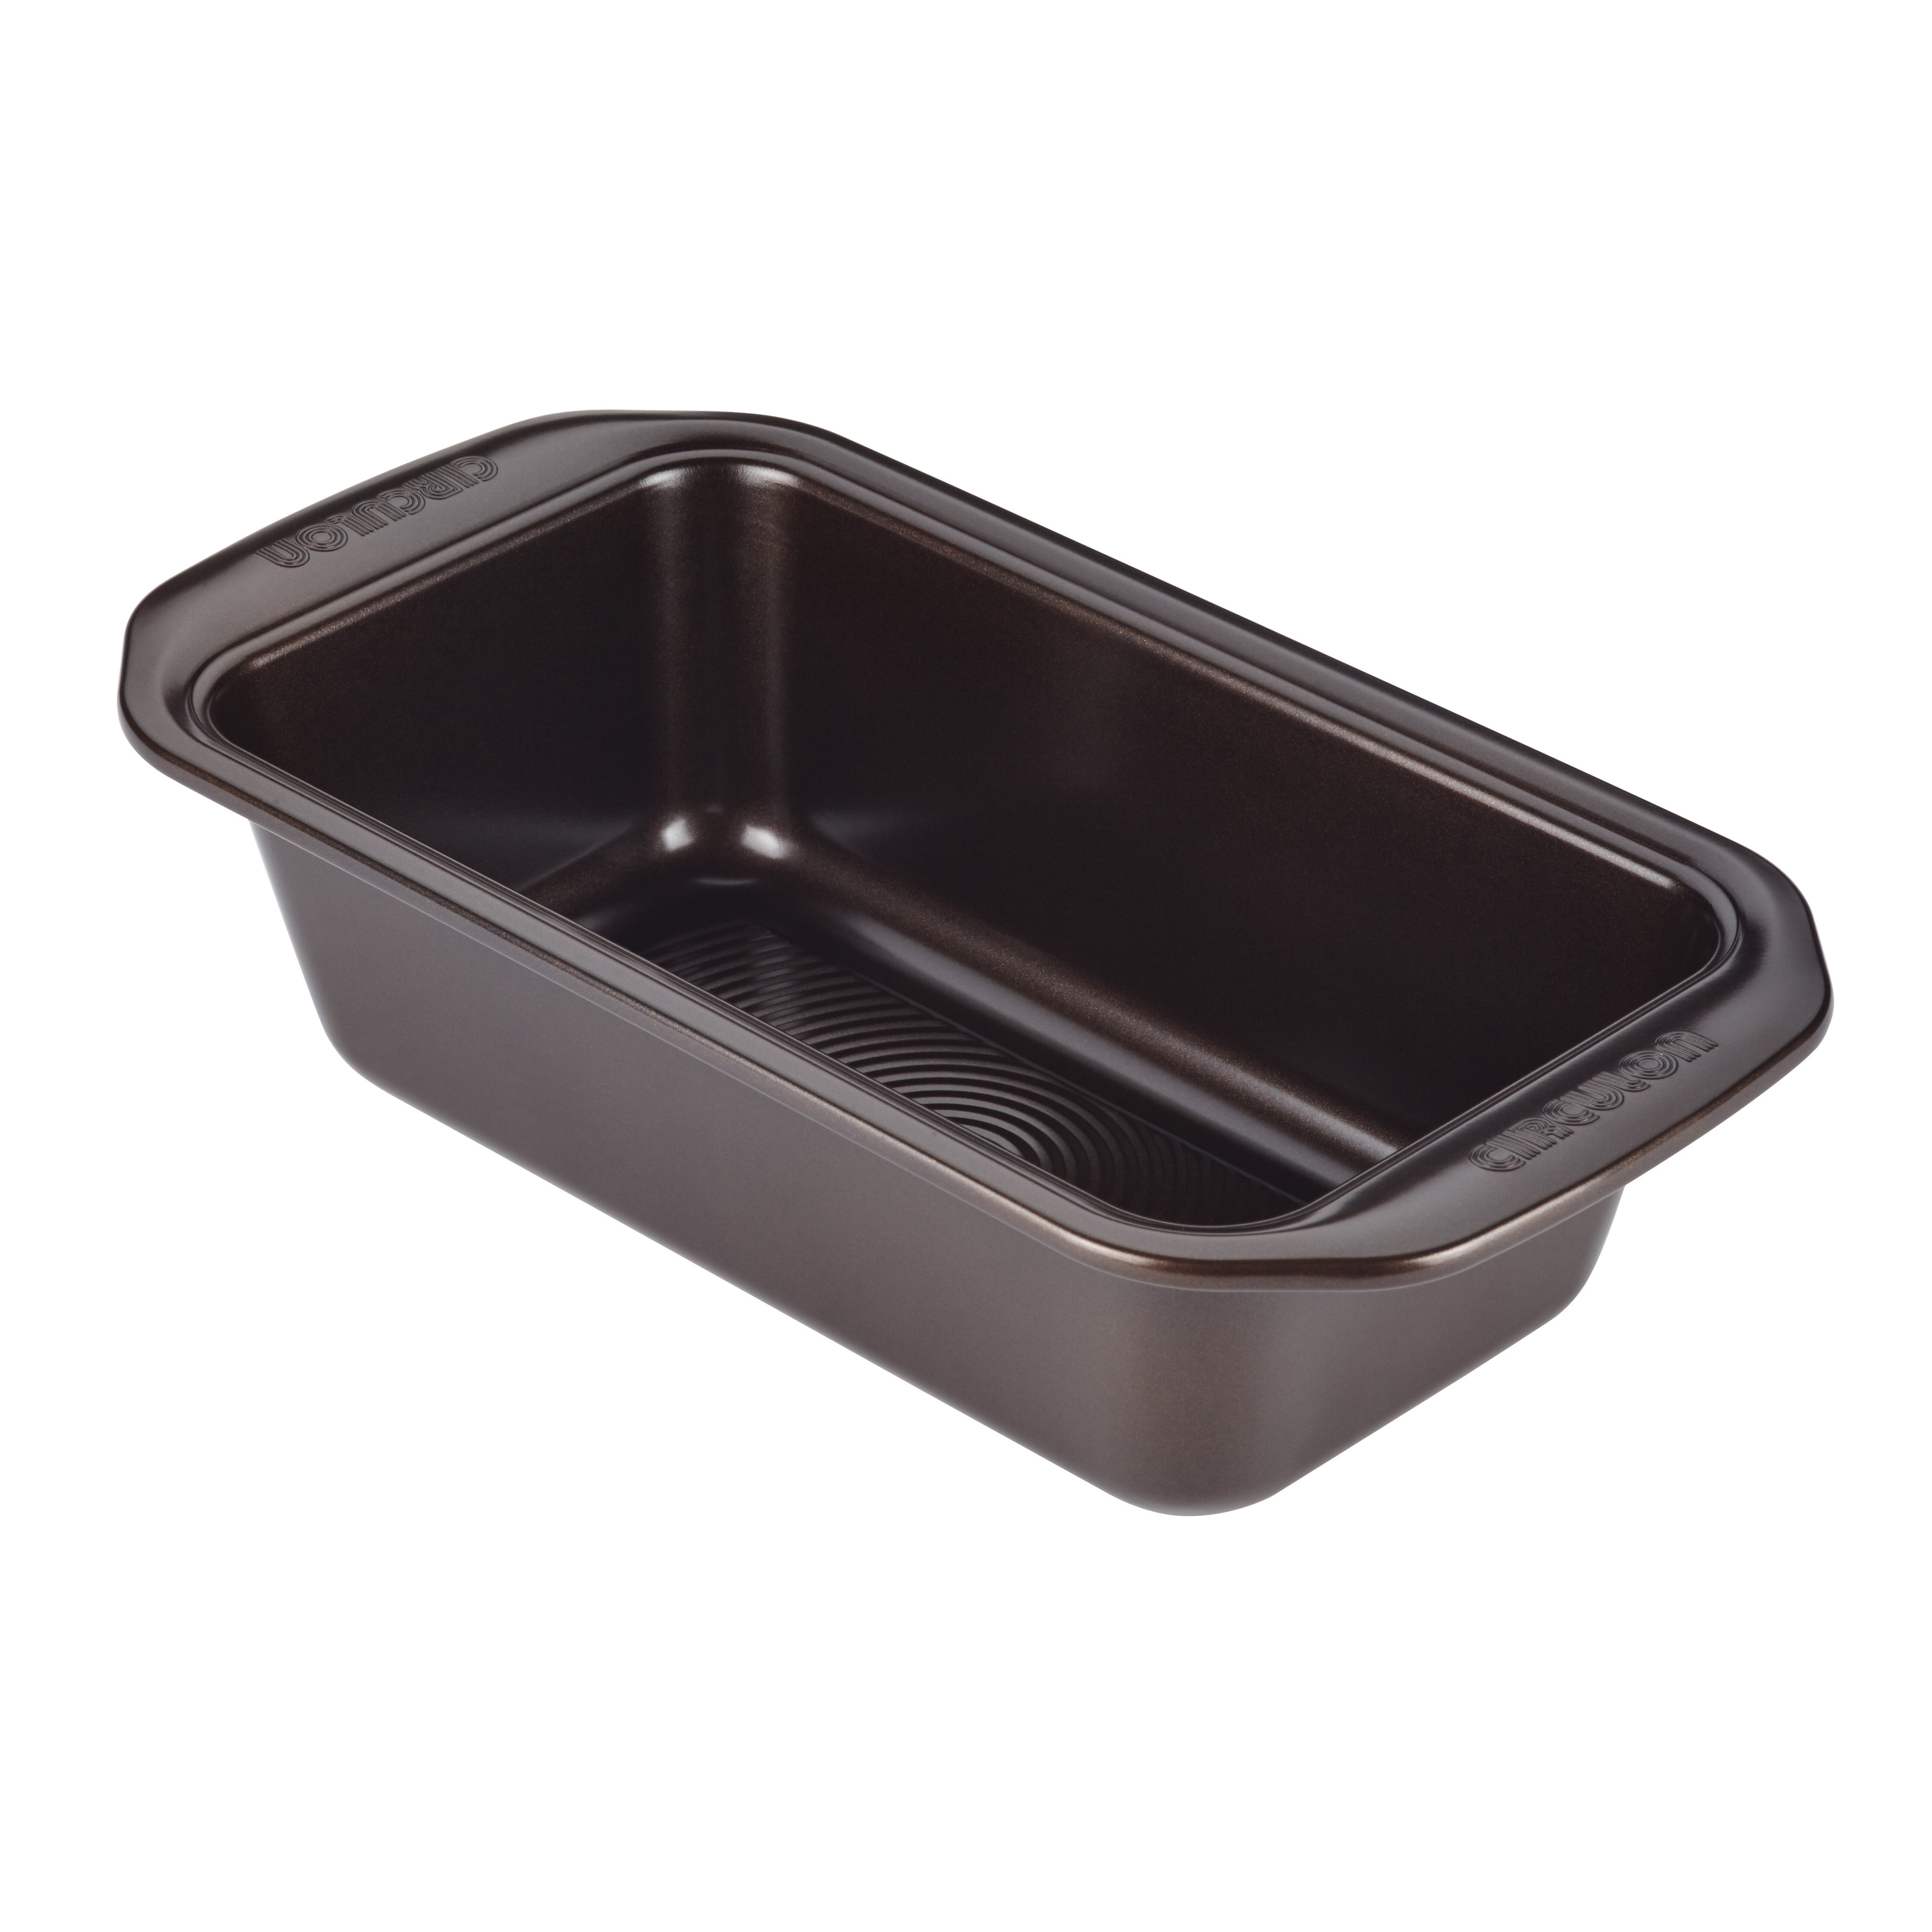 https://ak1.ostkcdn.com/images/products/is/images/direct/7732c3400c2021030167fcc8b81f20e3c95688a7/Circulon-Nonstick-Bakeware-9-Inch-x-5-Inch-Loaf-Pan%2C-Chocolate-Brown.jpg